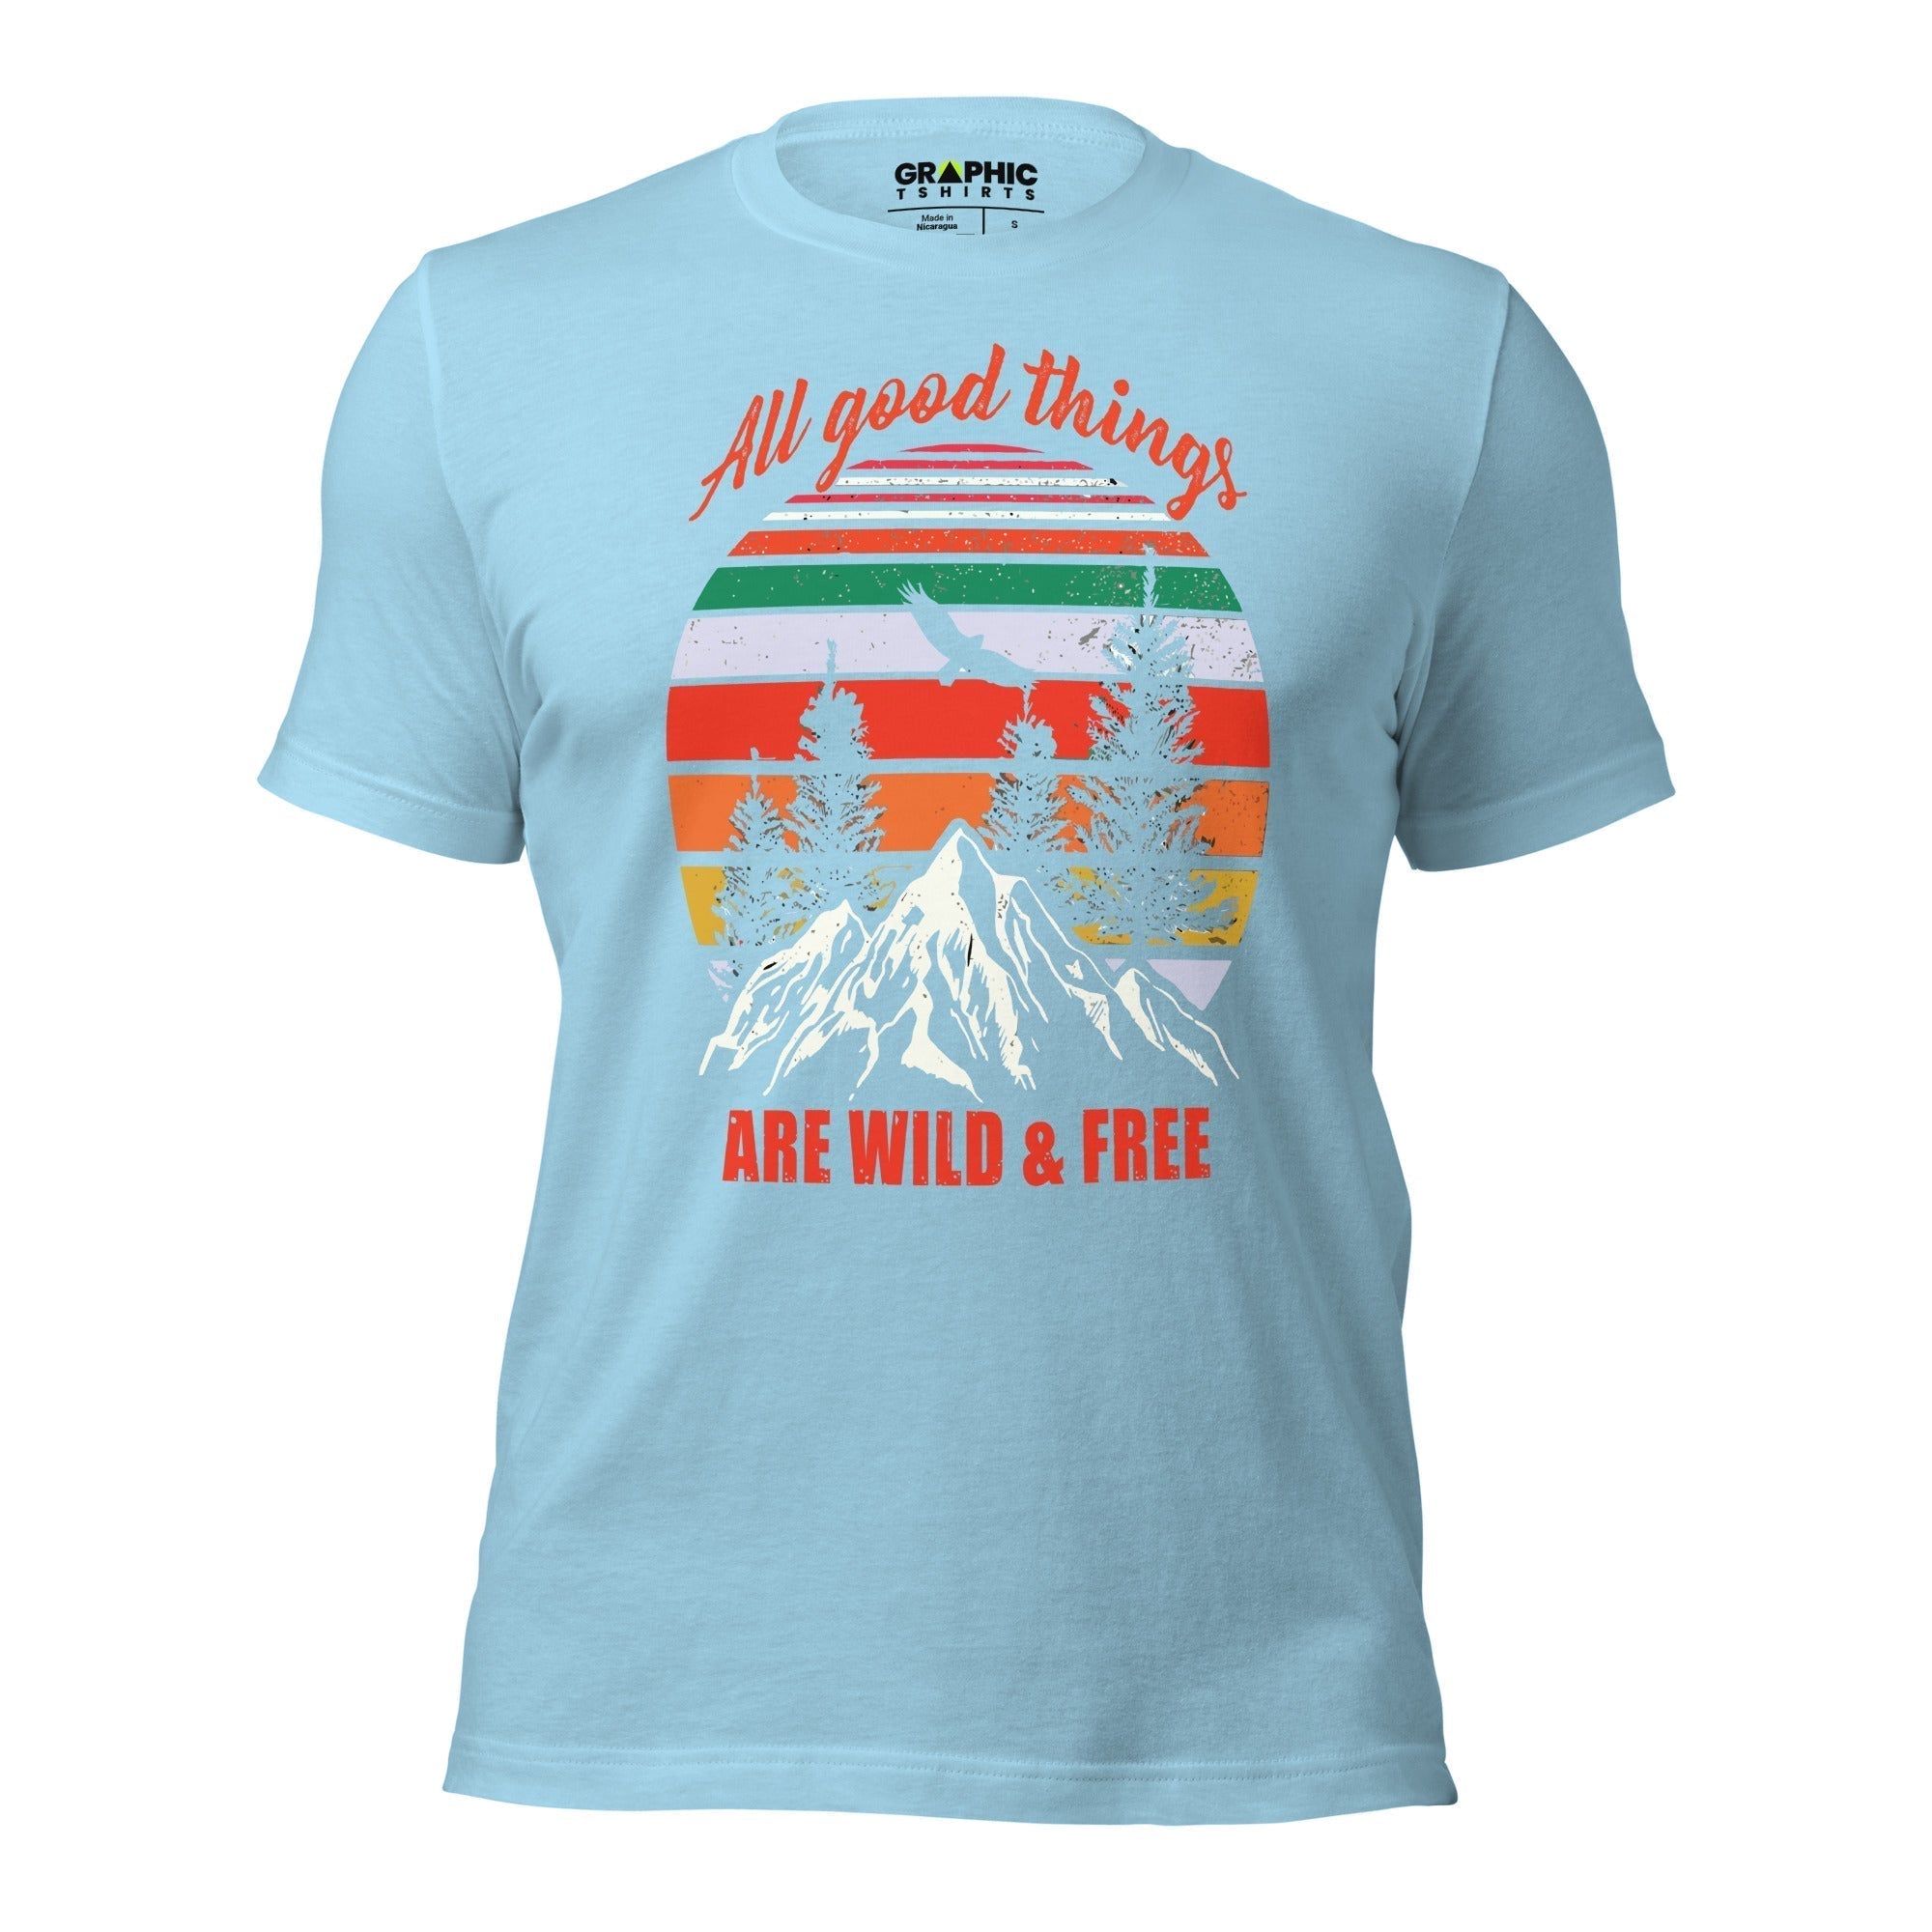 Unisex Staple T-Shirt - All Good Things Are Wild And Free - GRAPHIC T-SHIRTS